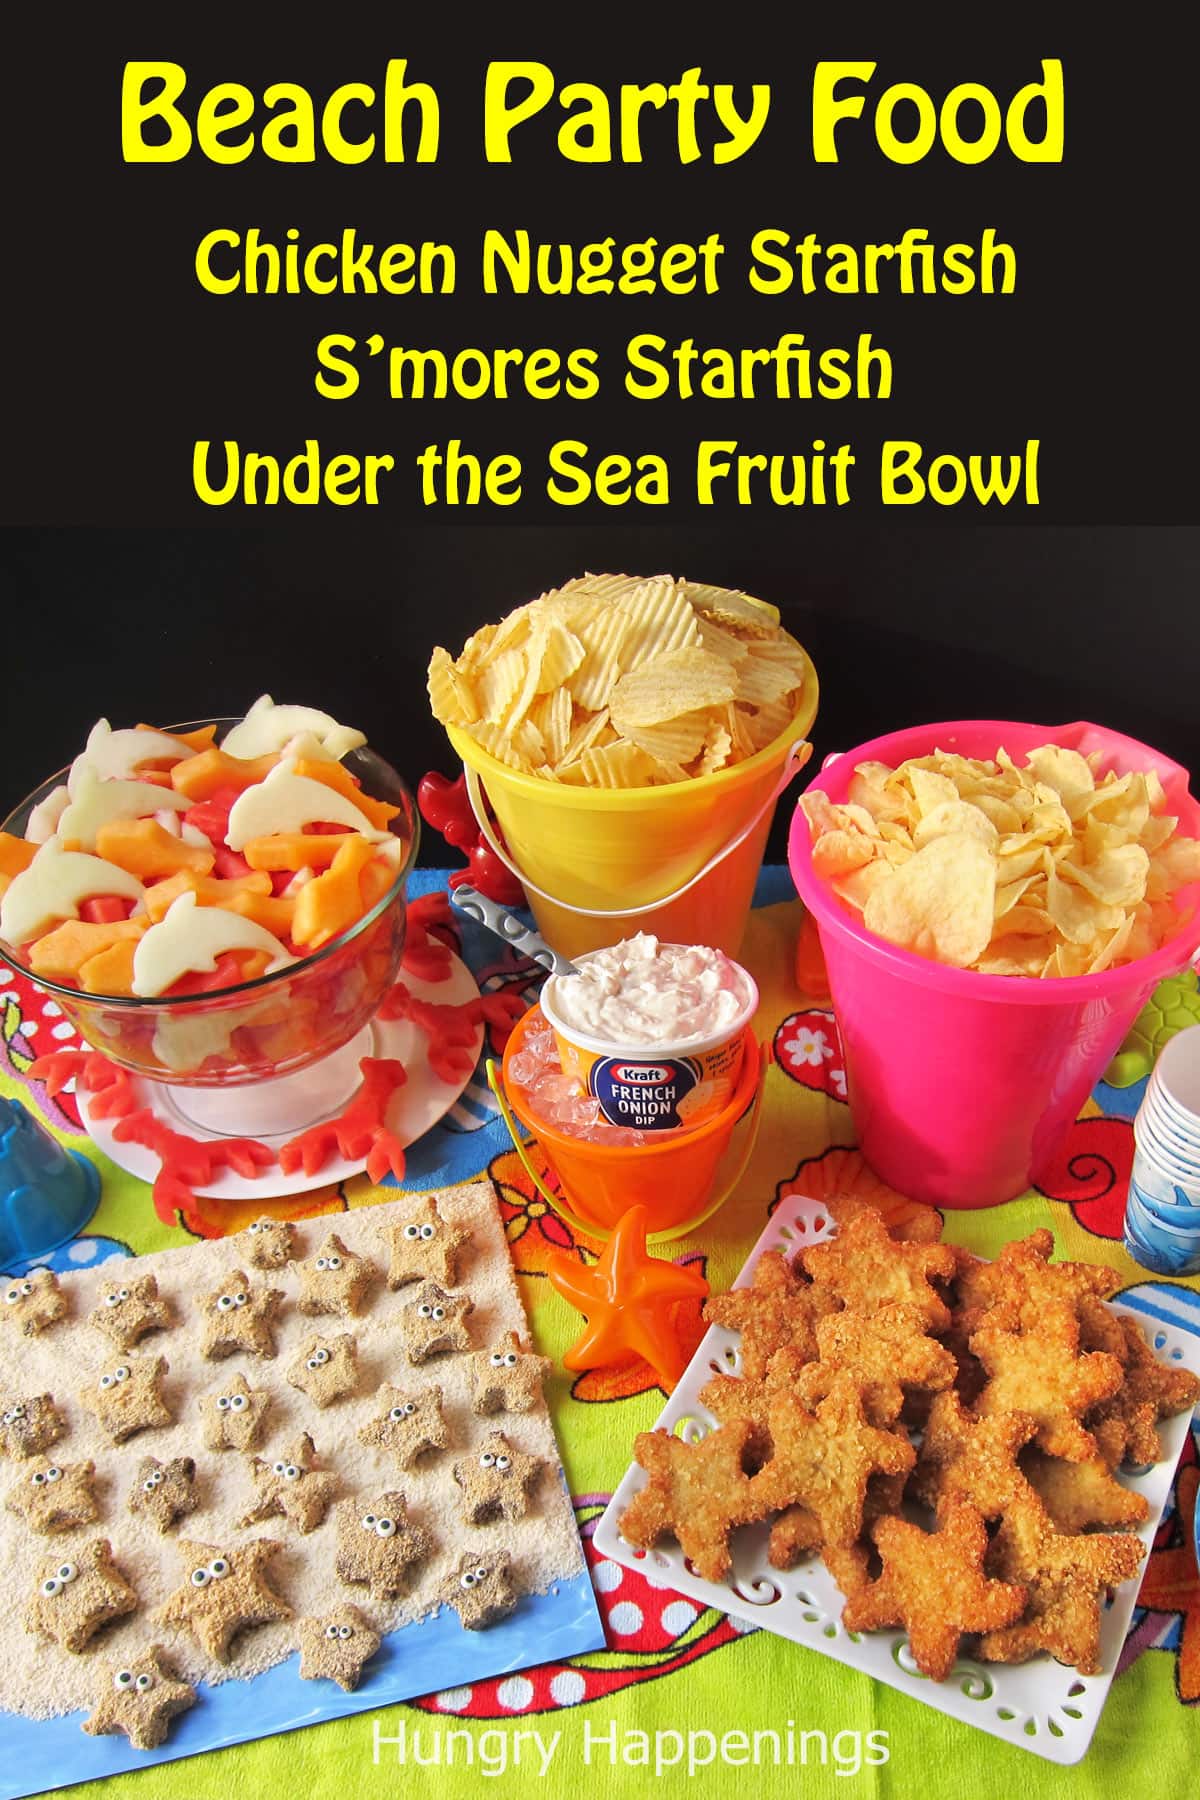 beach party food including chicken nugget starfish, under the sea fruit bowl, and starfish s'mores.